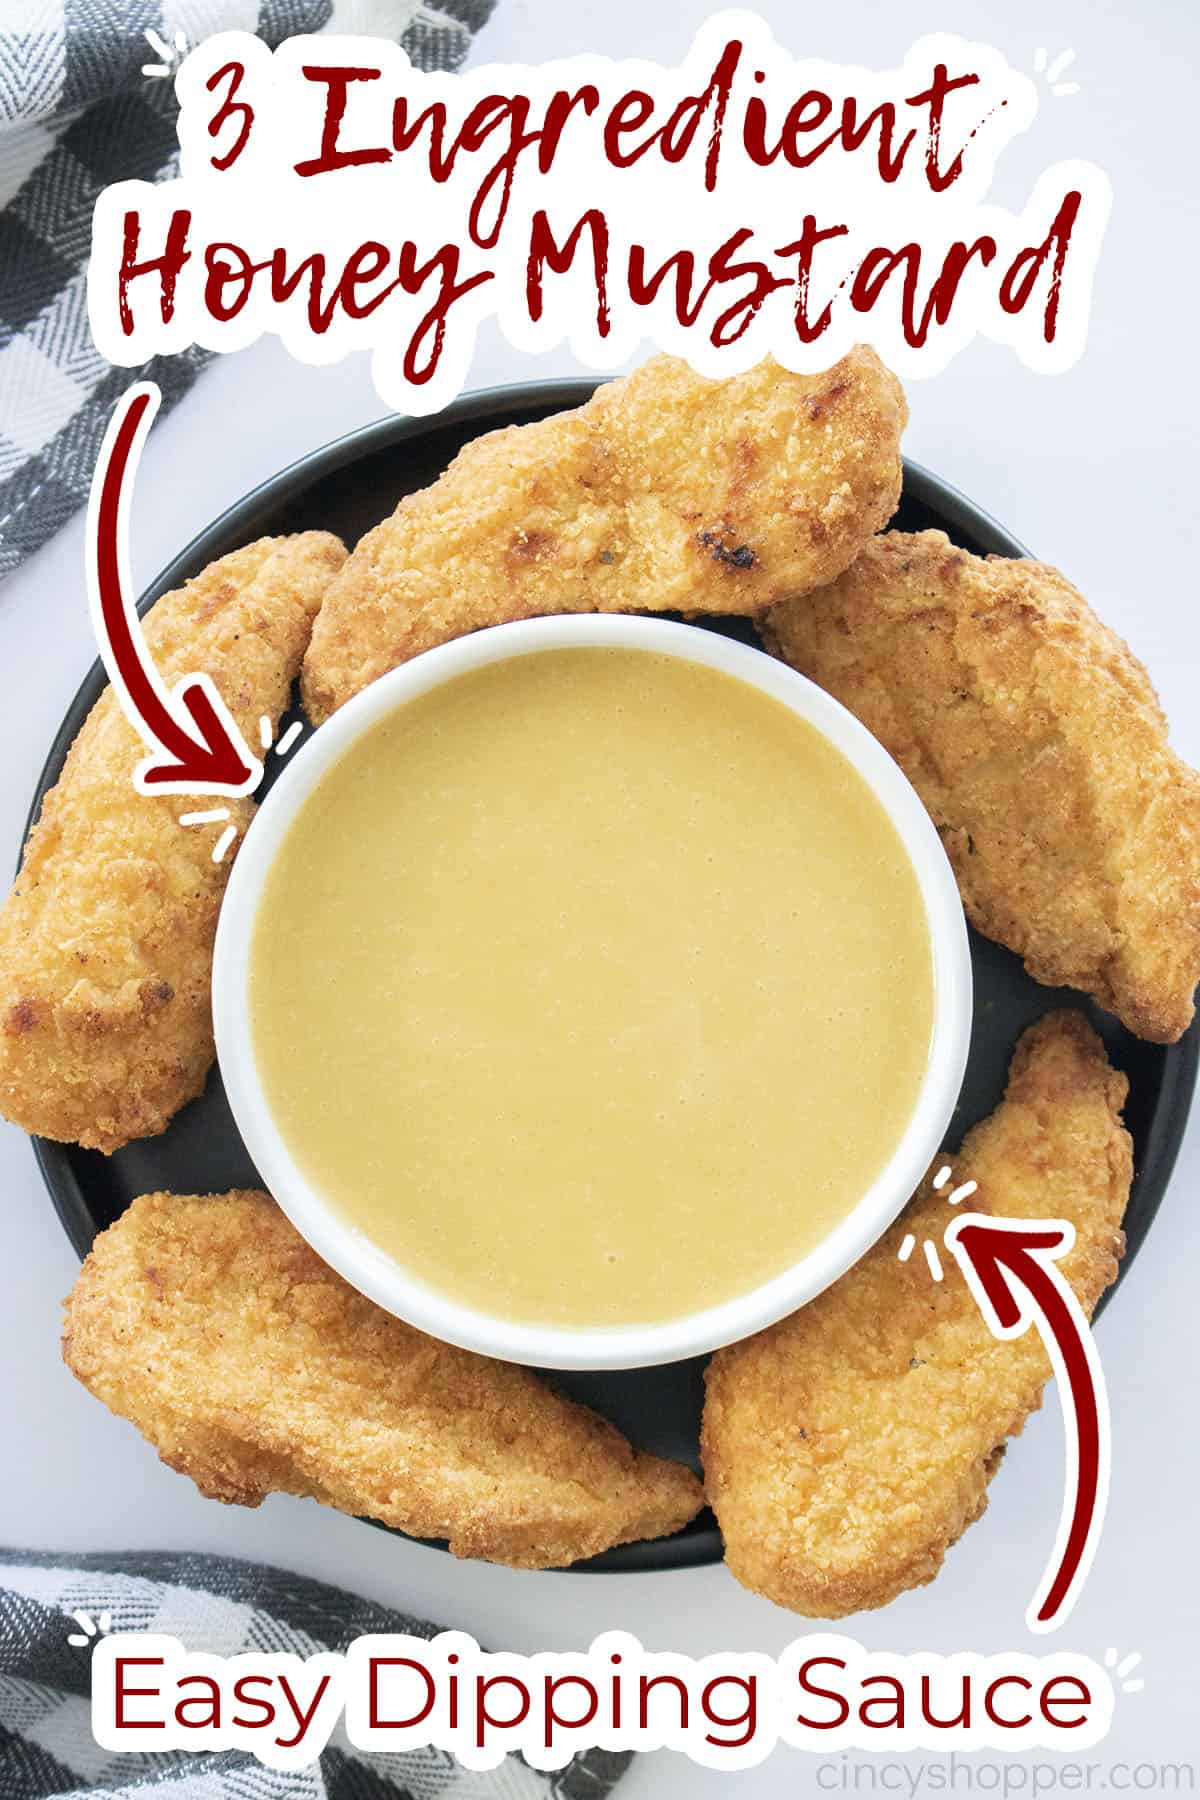 Text on image 3 Ingredient Honey Mustard Easy Dipping Sauce.